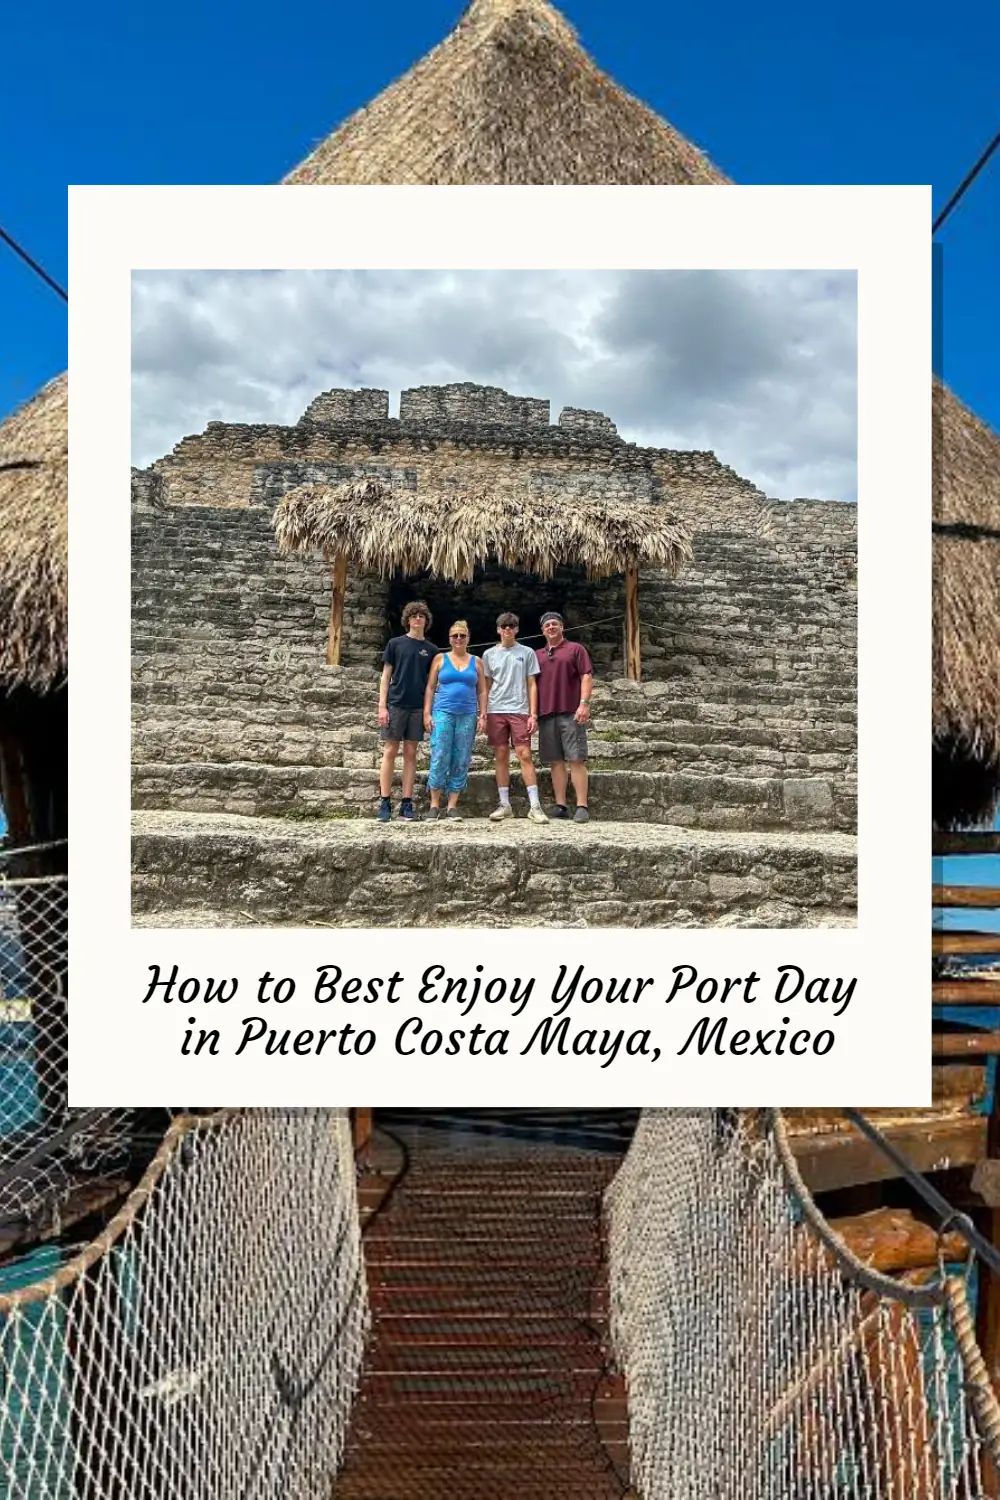 From exploring the engineered cruise town to visiting the unique aviary, the stunning Mayan ruins of Chaccoben to relaxing at the local beach club, Tropicante - get the ultimate guide to making the most of your day in Costa Maya.